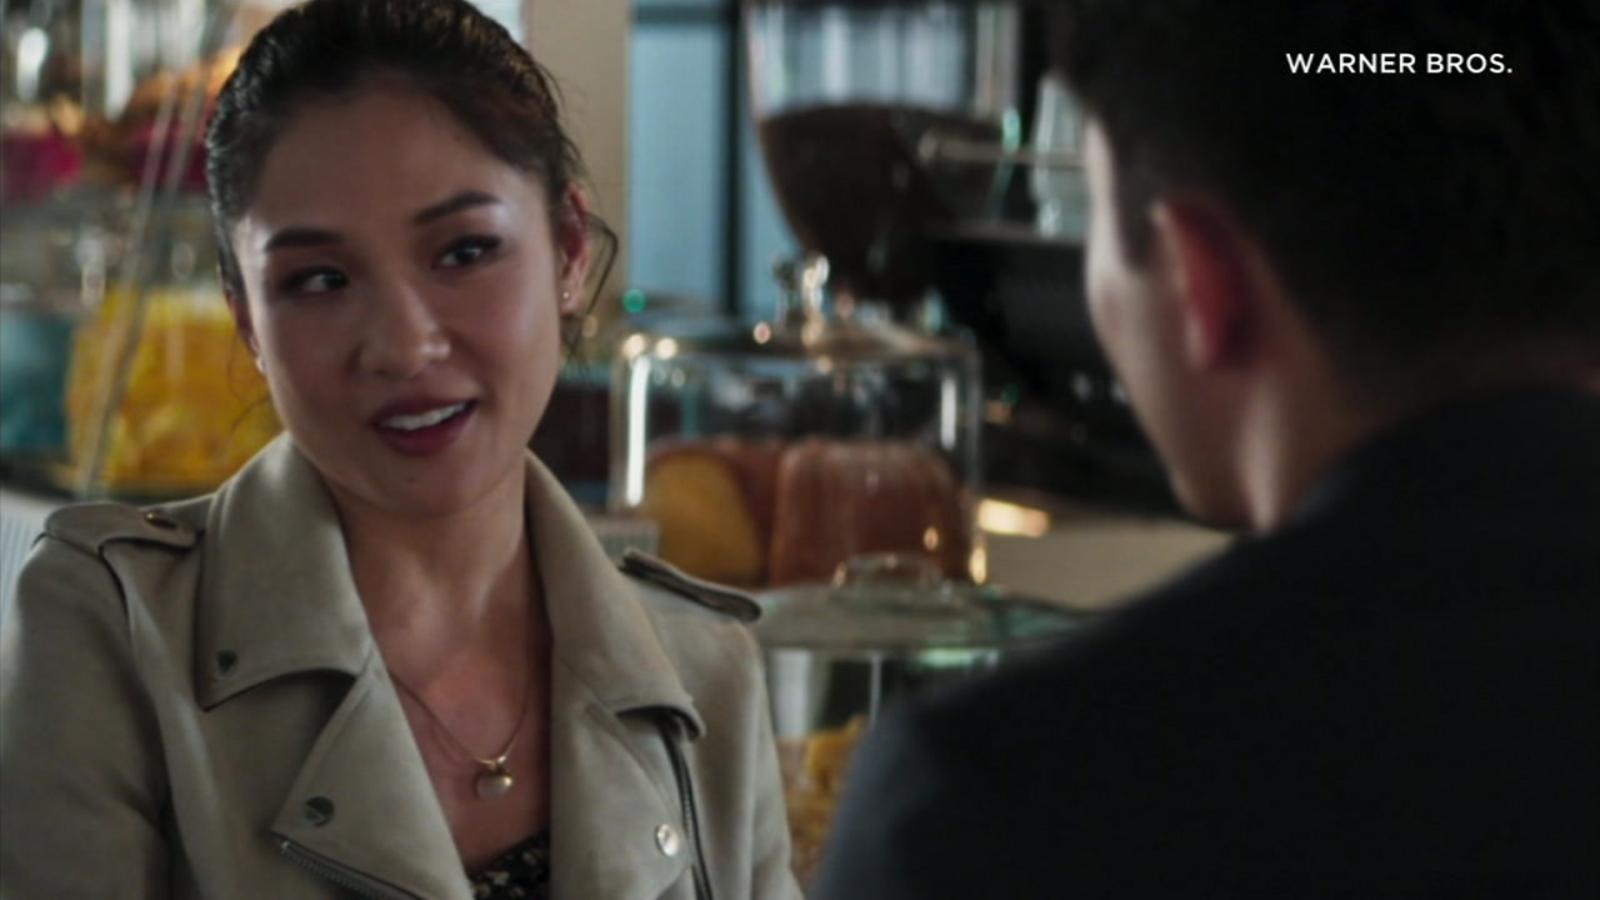 Constance Wu moves from sitcom to big screen in 'Crazy Rich Asians